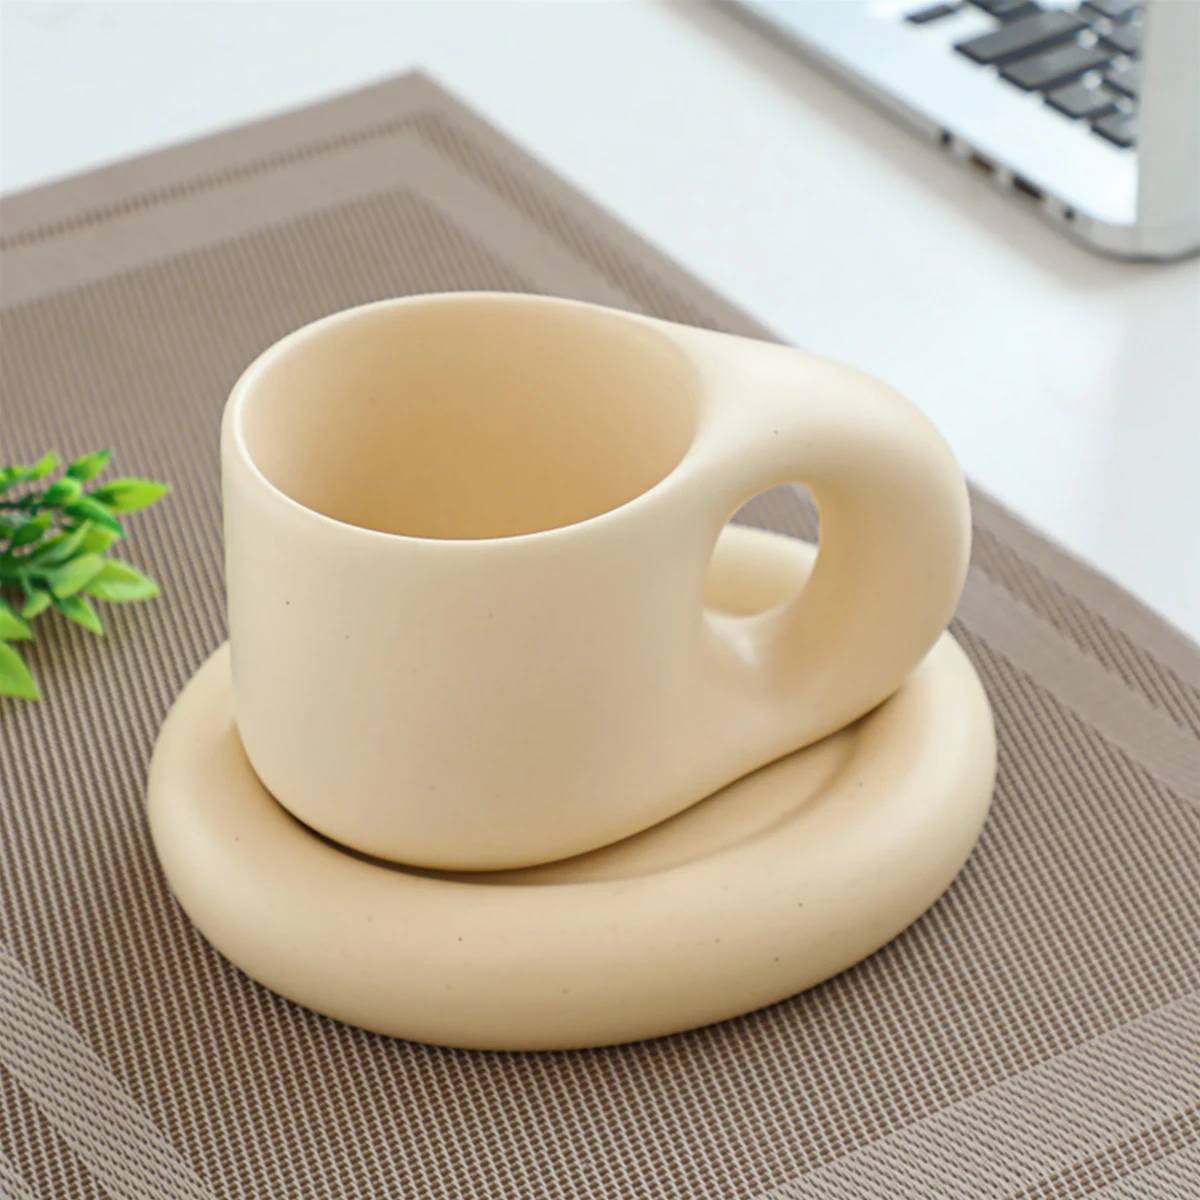 

New Chubby Coffee Mug with Plate 270ml Chubby Funny Mug with Handle 9oz Delicate Cute Cup and Saucer Set Portable Novelty